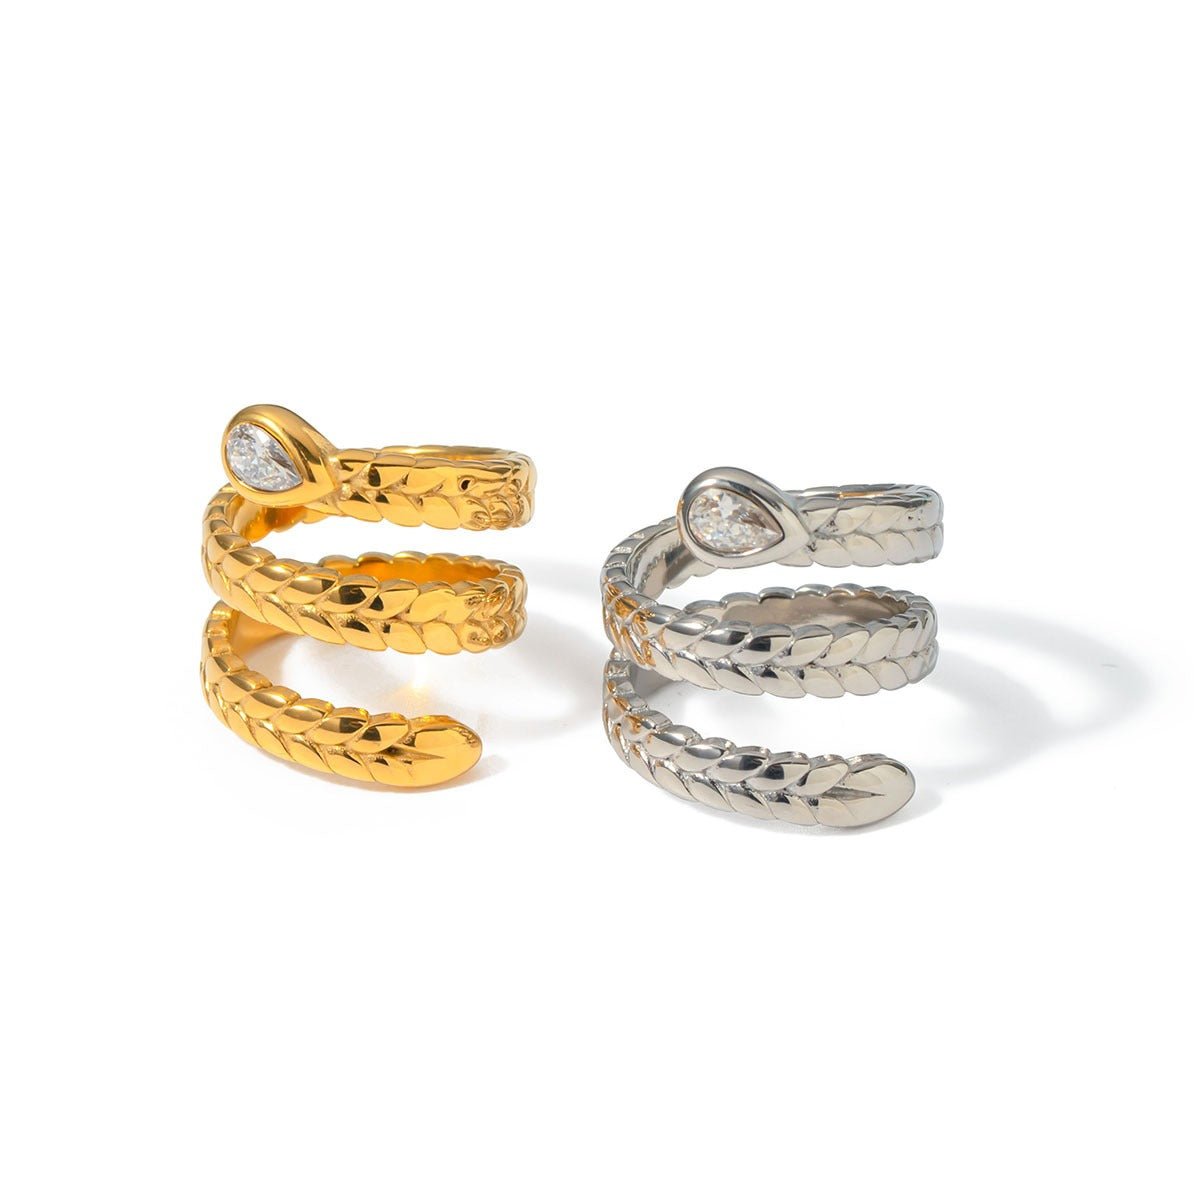 Beautiful & unique snake-shaped design ring in 18k gold - JuVons